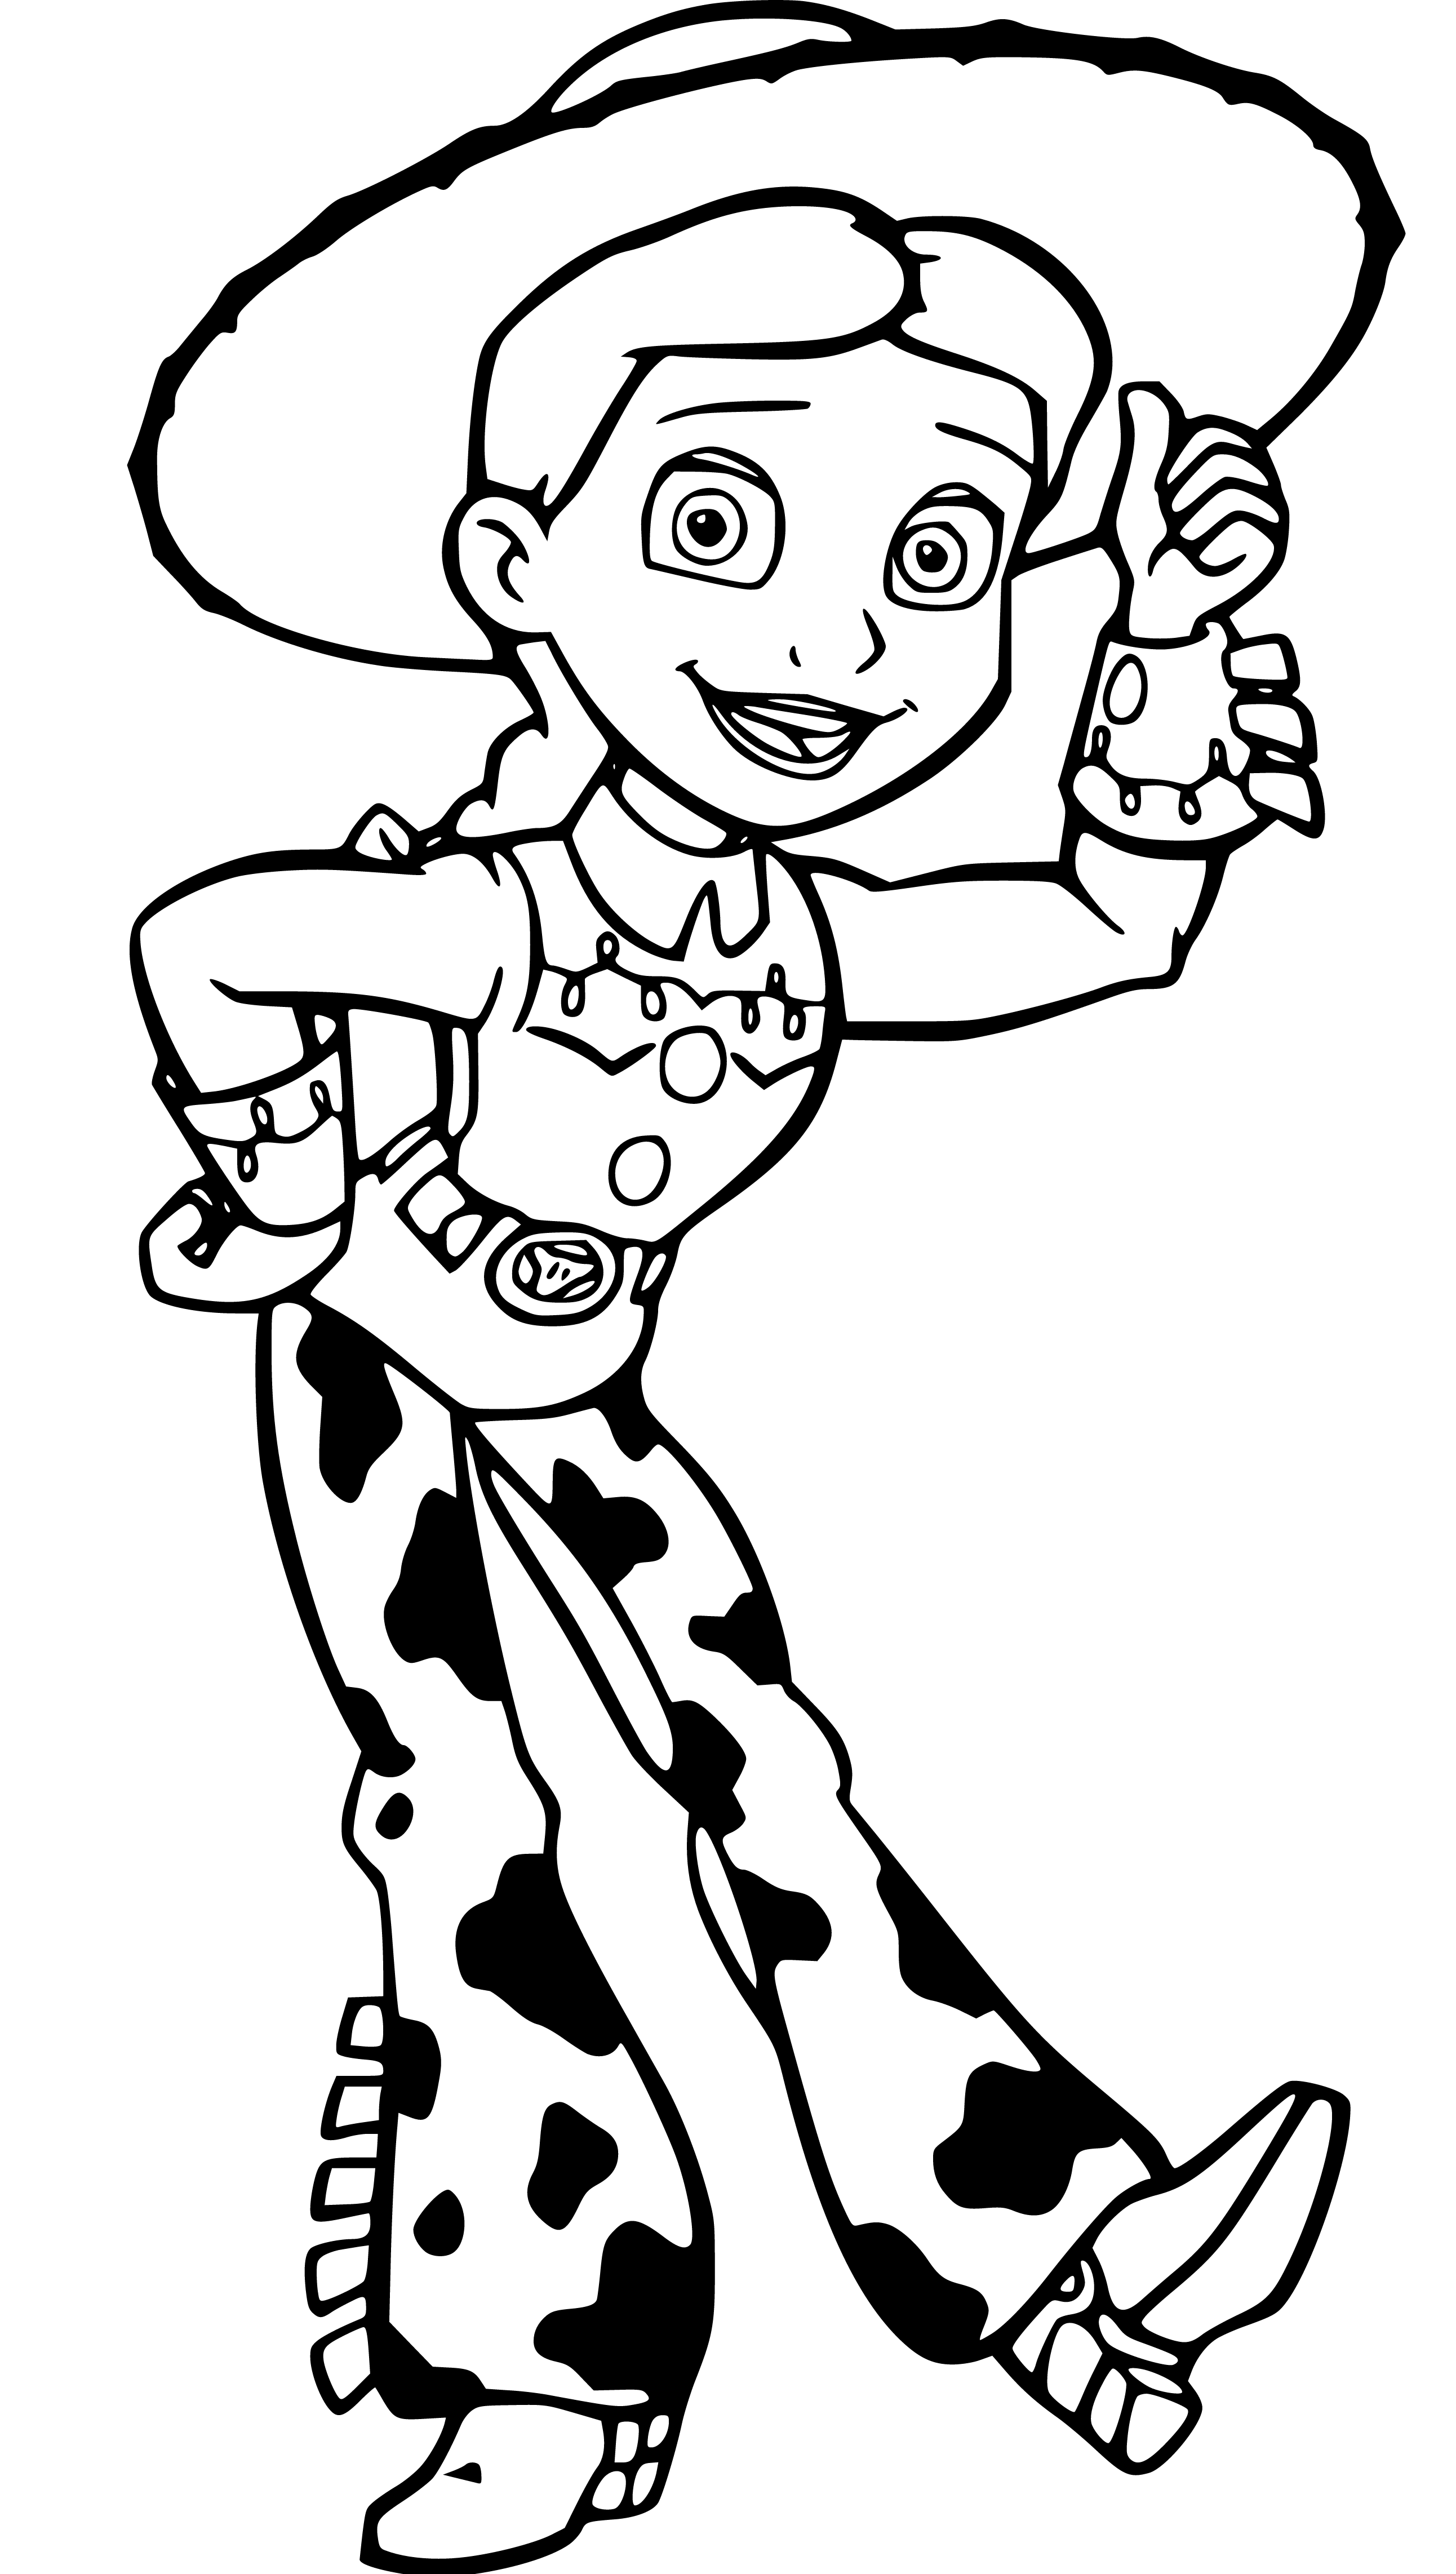 Printable Jessie Coloring Page for kids.